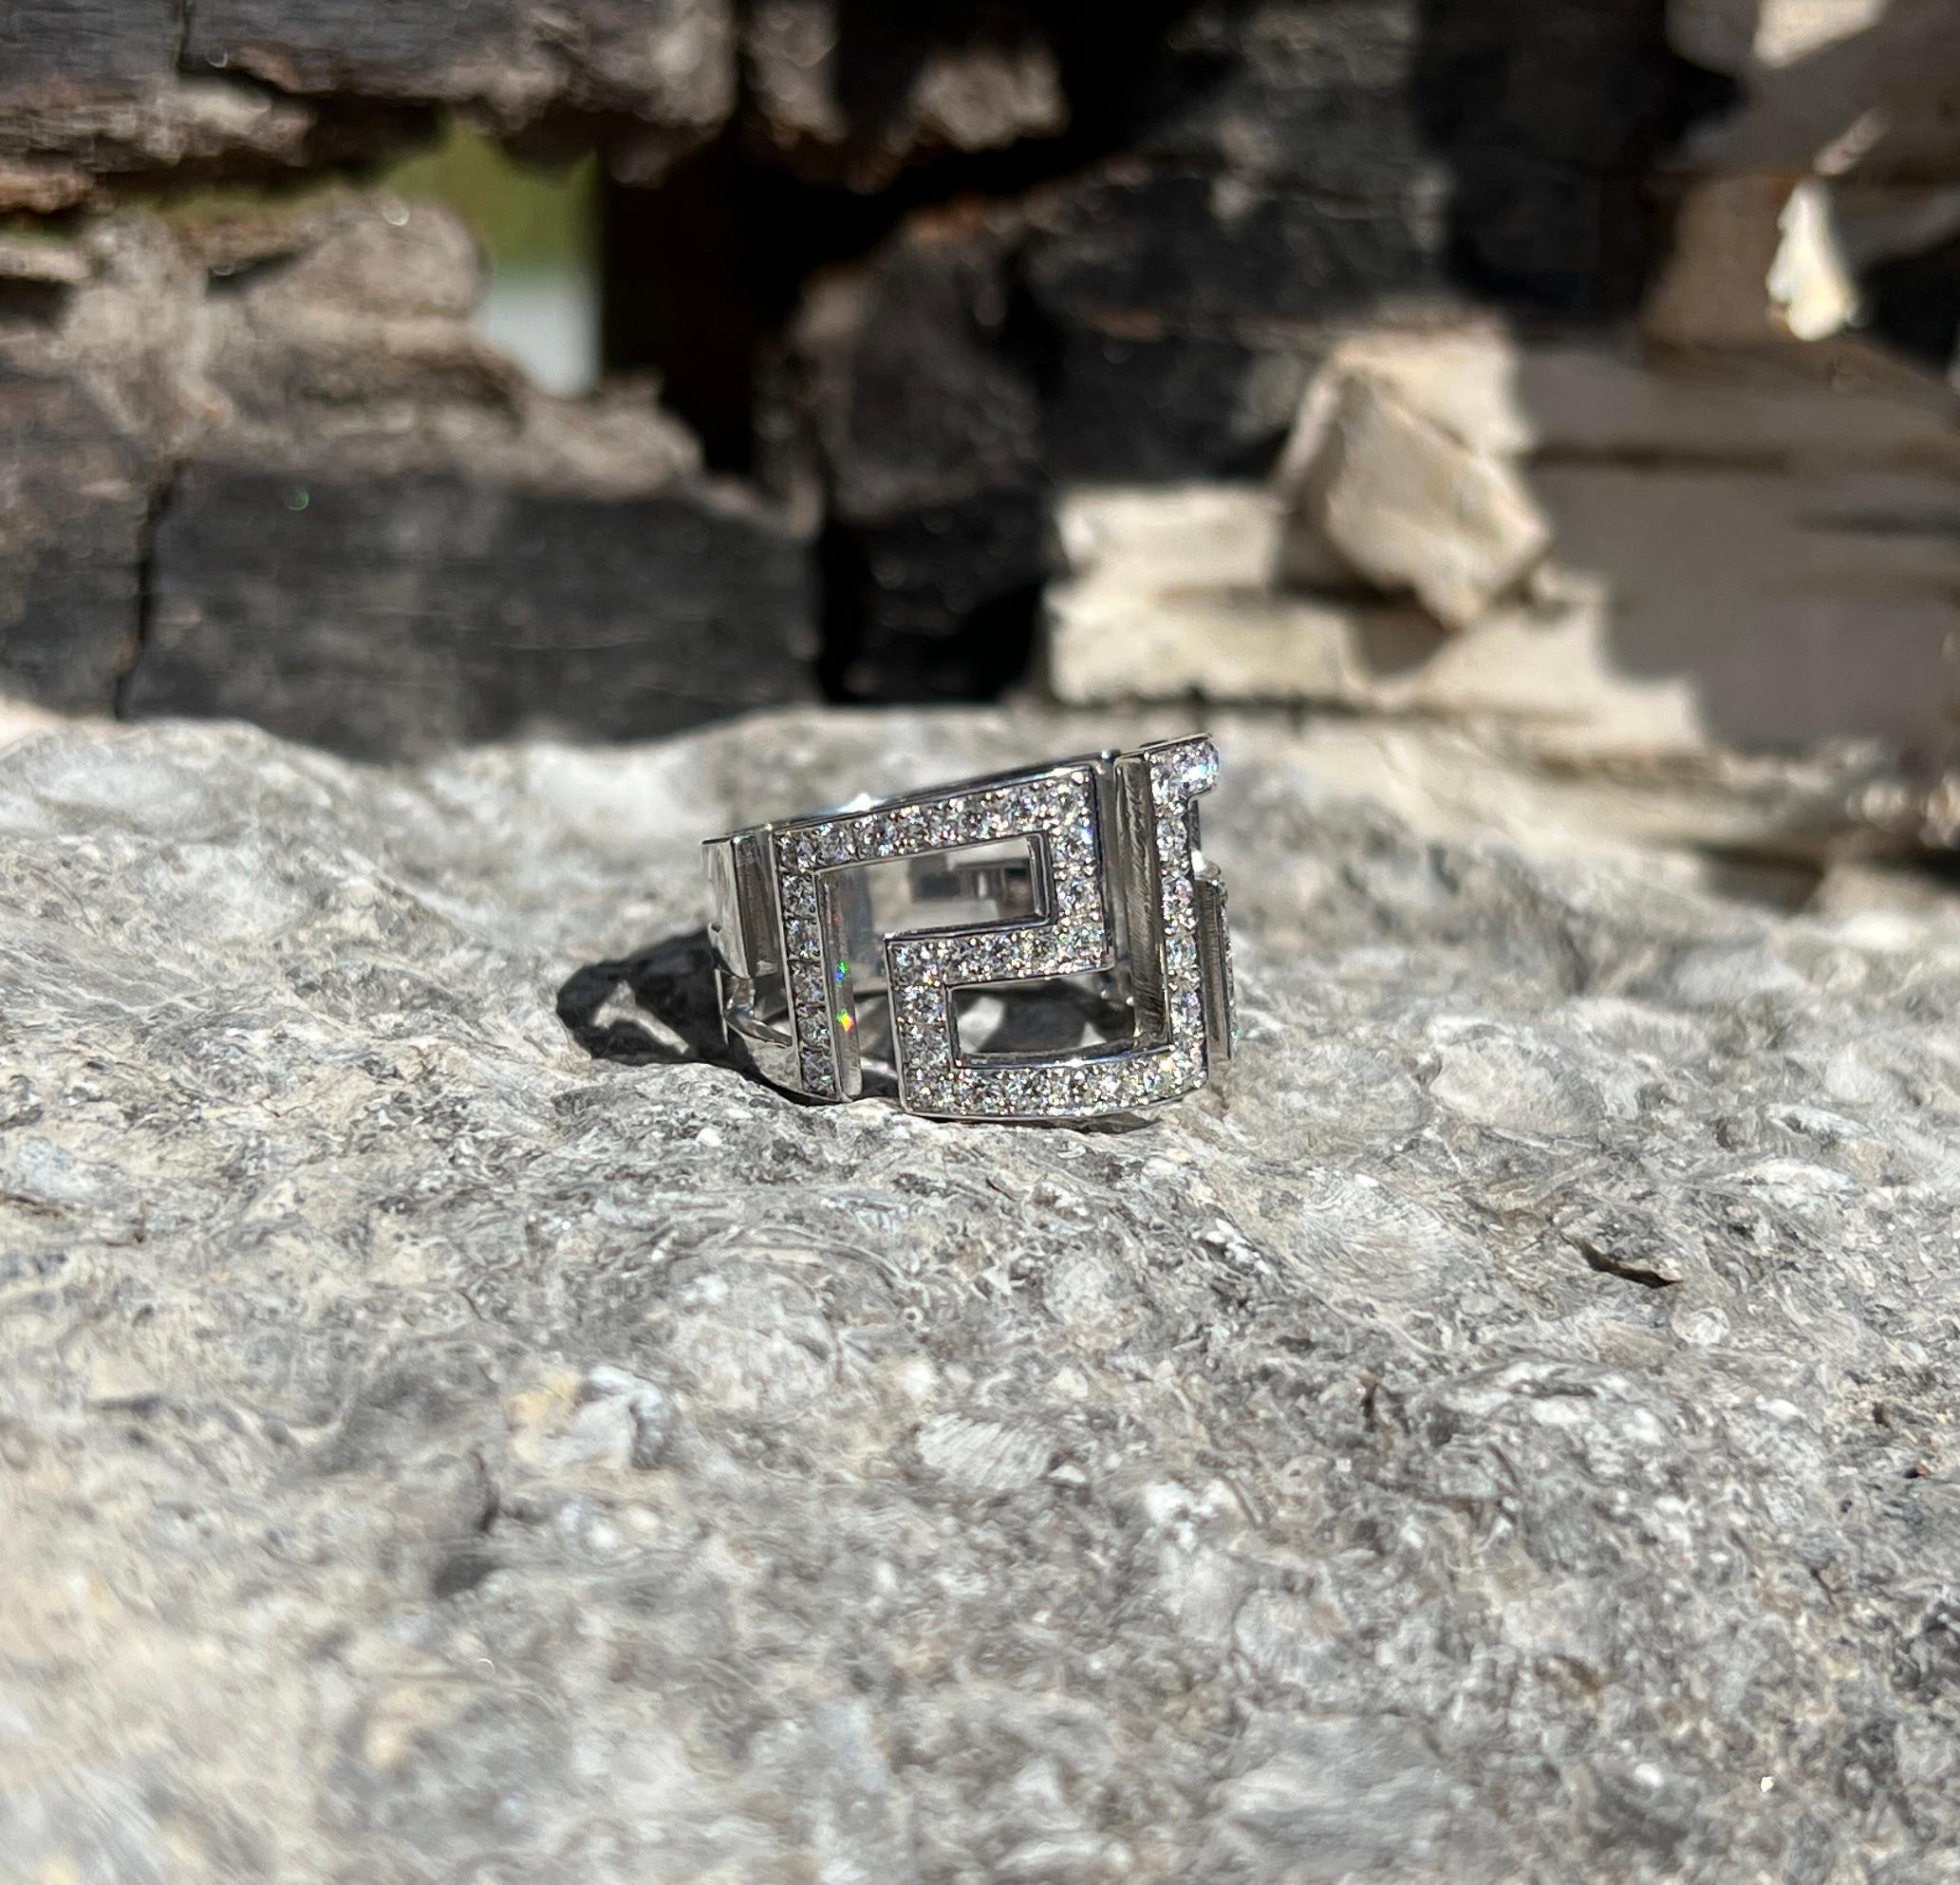 You are admiring S. Georgios designer 18 Karat White Gold Hand Made Diamond Ring with the Greek Key design that symbolizes eternity. It is known as the symbol of long life and it is one of the most popular designs in the world.
The Ring is decorated